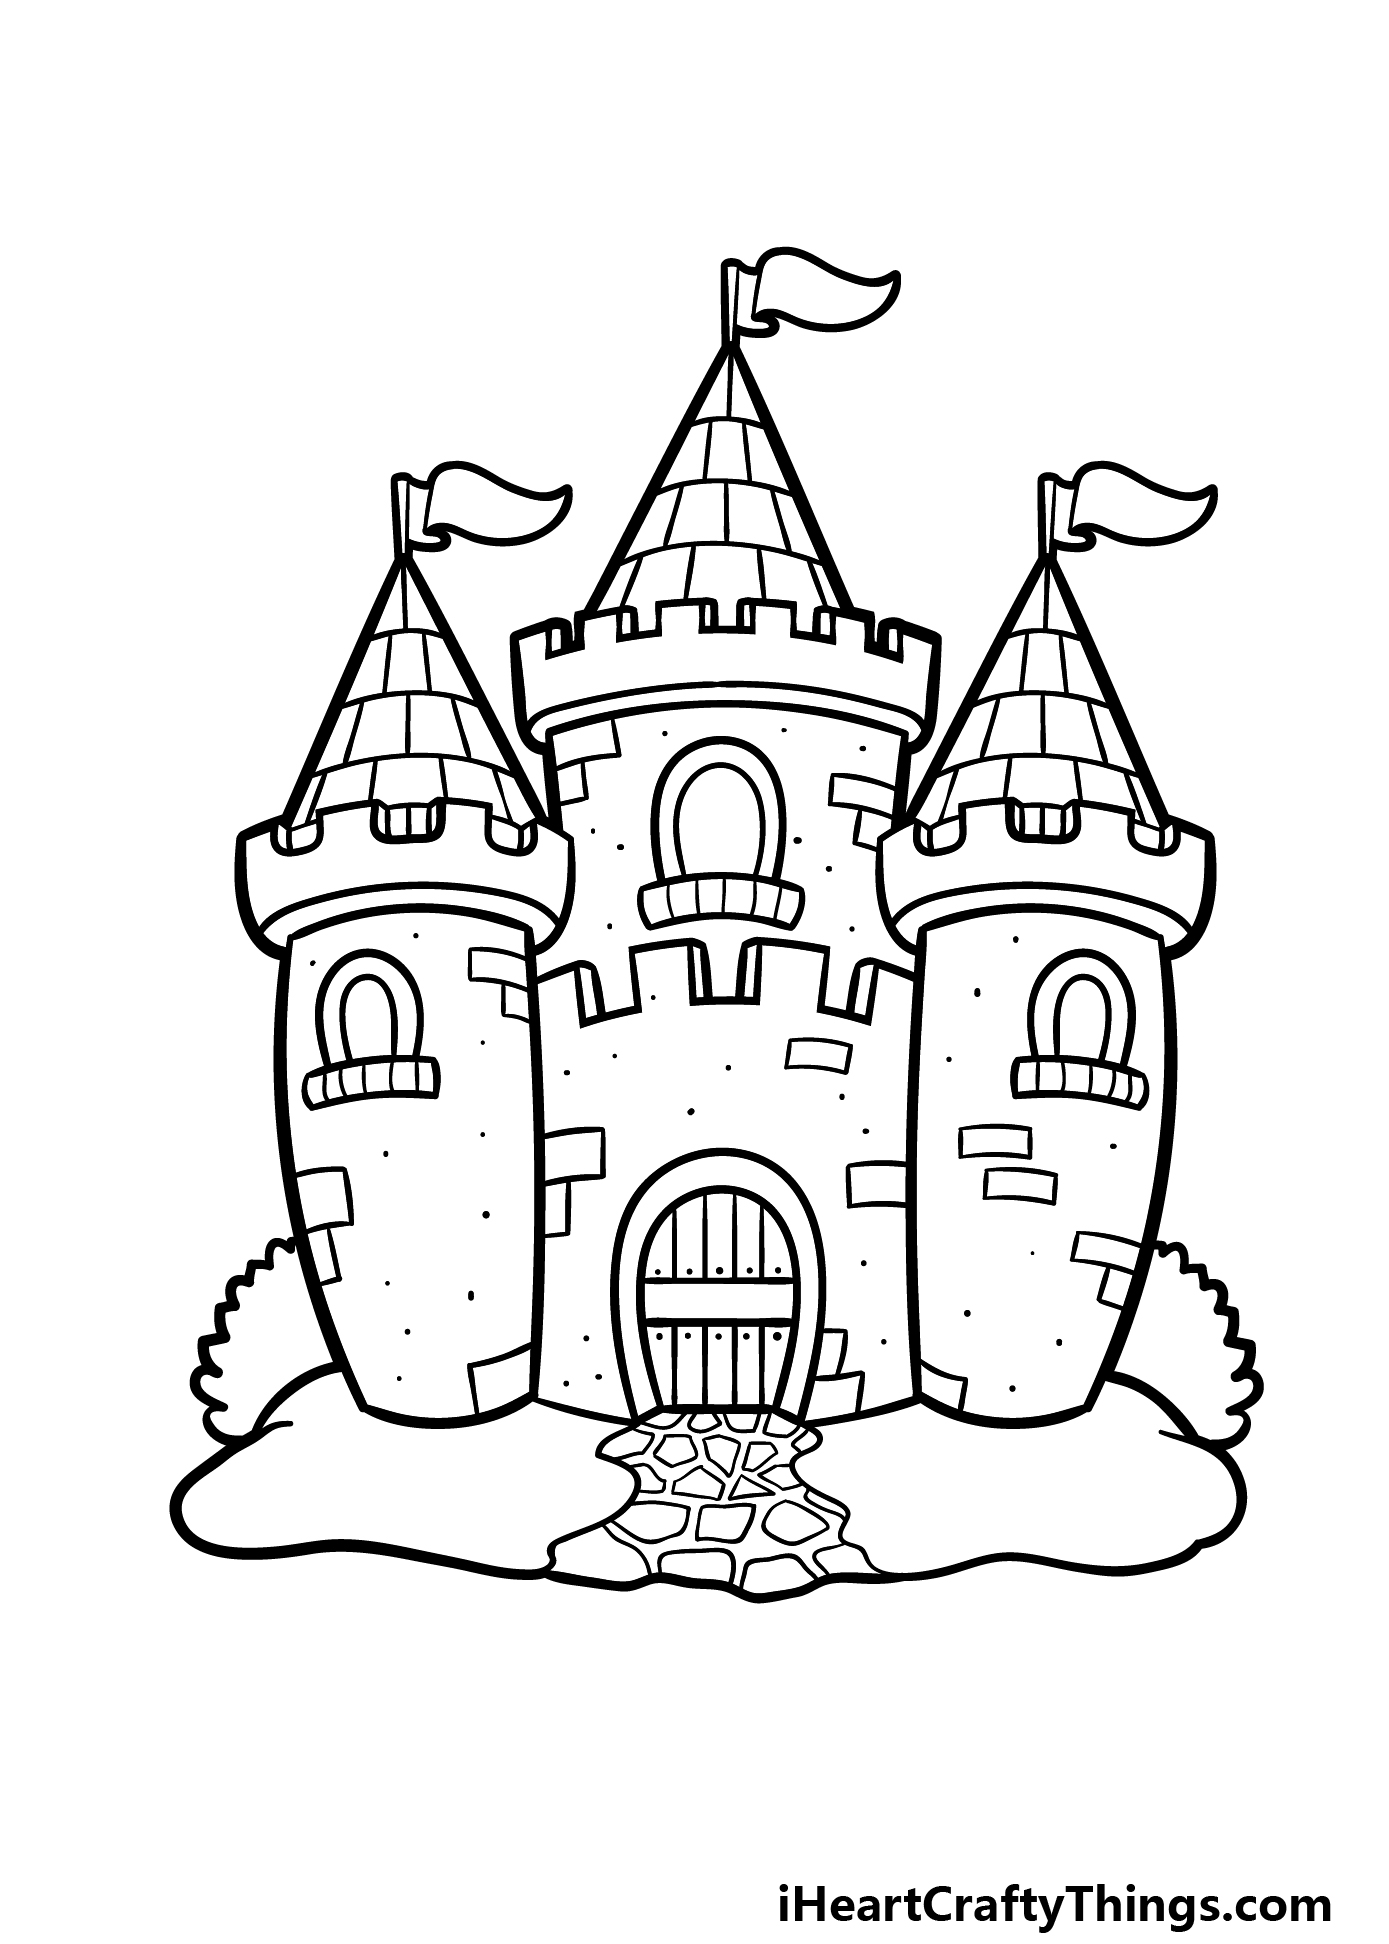 Cartoon Castle Drawing - How To Draw A Cartoon Castle Step By Step